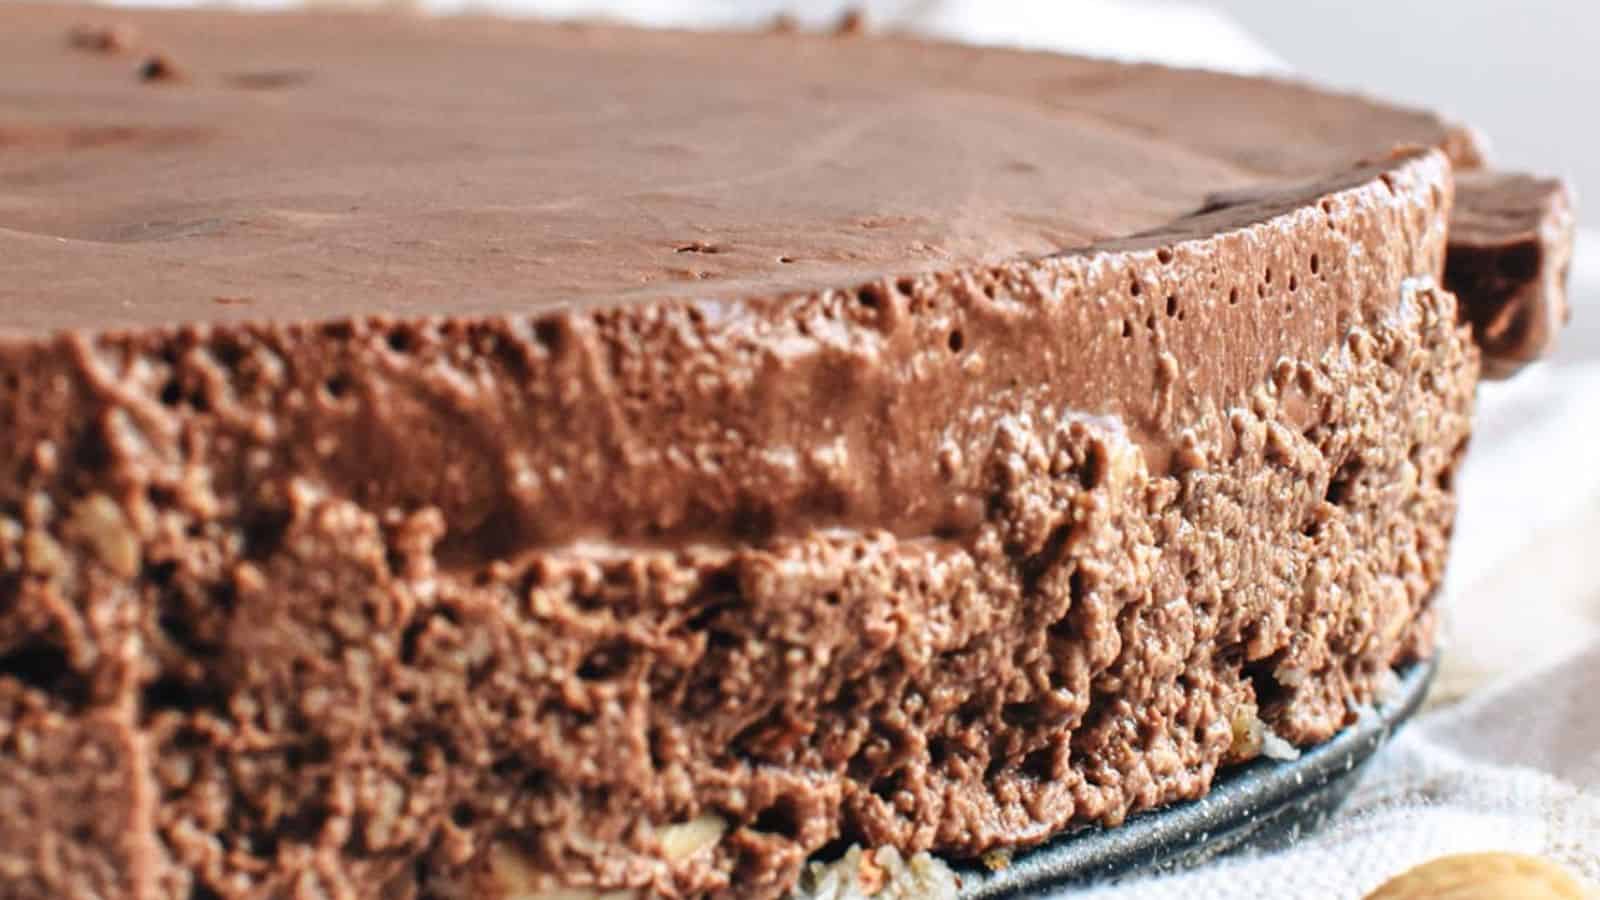 <p>Calling all chocolate lovers – our vegan chocolate cake is about to become your new obsession! Whether you’re celebrating a birthday or simply craving something sweet, this cake is sure to impress. Plus, it’s vegan-friendly, so everyone can enjoy a slice. <br><strong>Get the Recipe: </strong><a href="https://twocityvegans.com/raw-vegan-chocolate-cake-recipe/?utm_source=msn&utm_medium=page&utm_campaign=msn">Decadent Vegan Chocolate Cake</a></p>